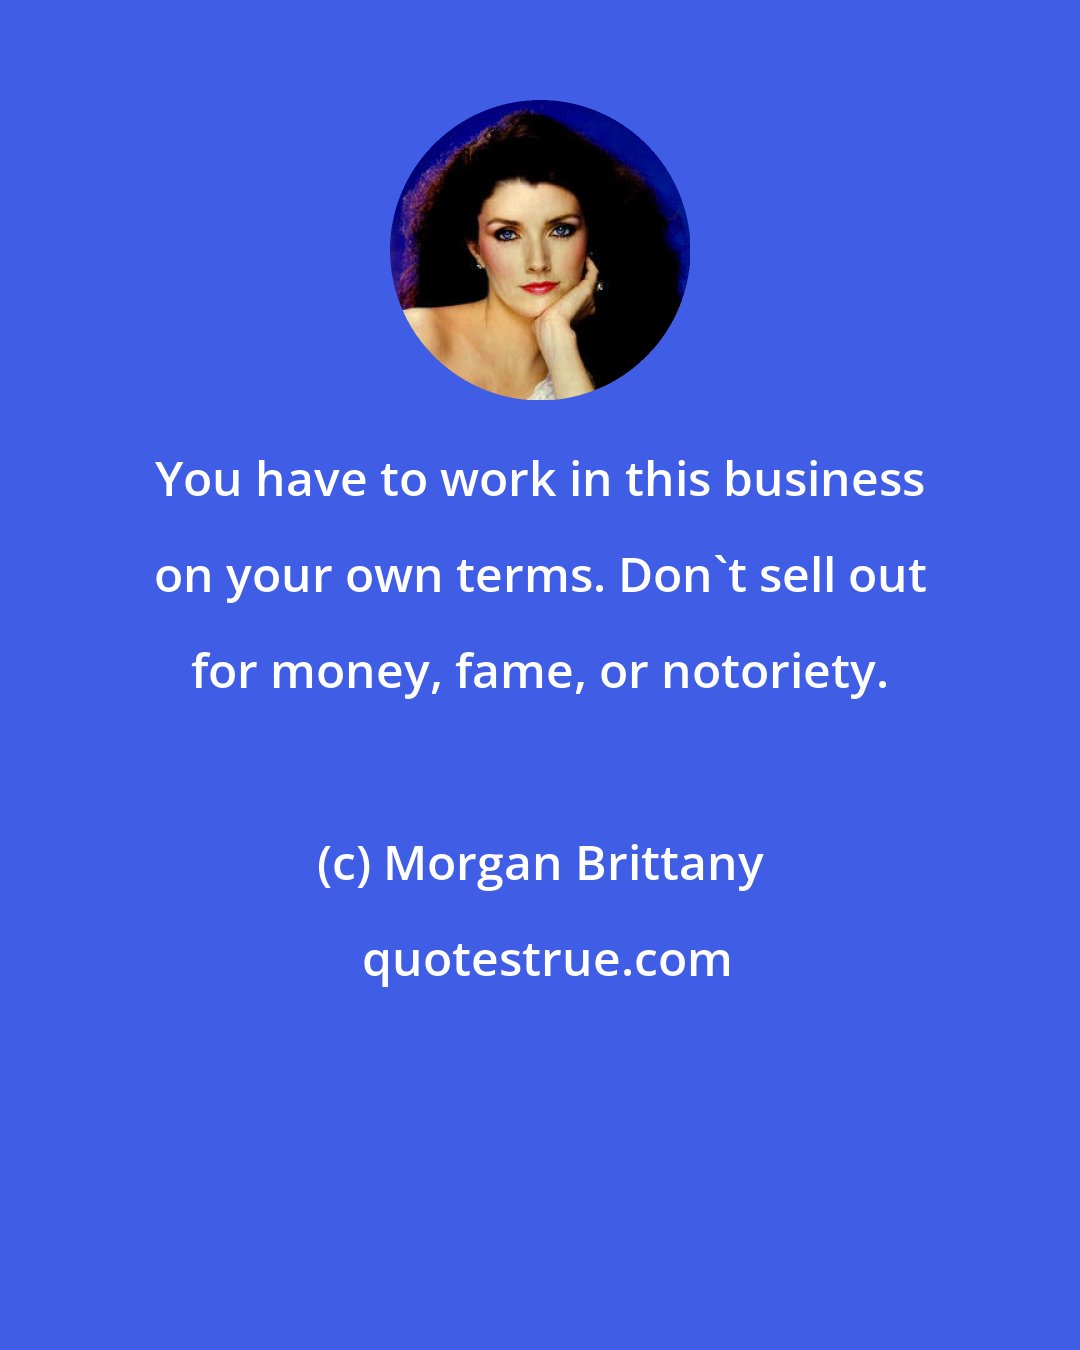 Morgan Brittany: You have to work in this business on your own terms. Don't sell out for money, fame, or notoriety.